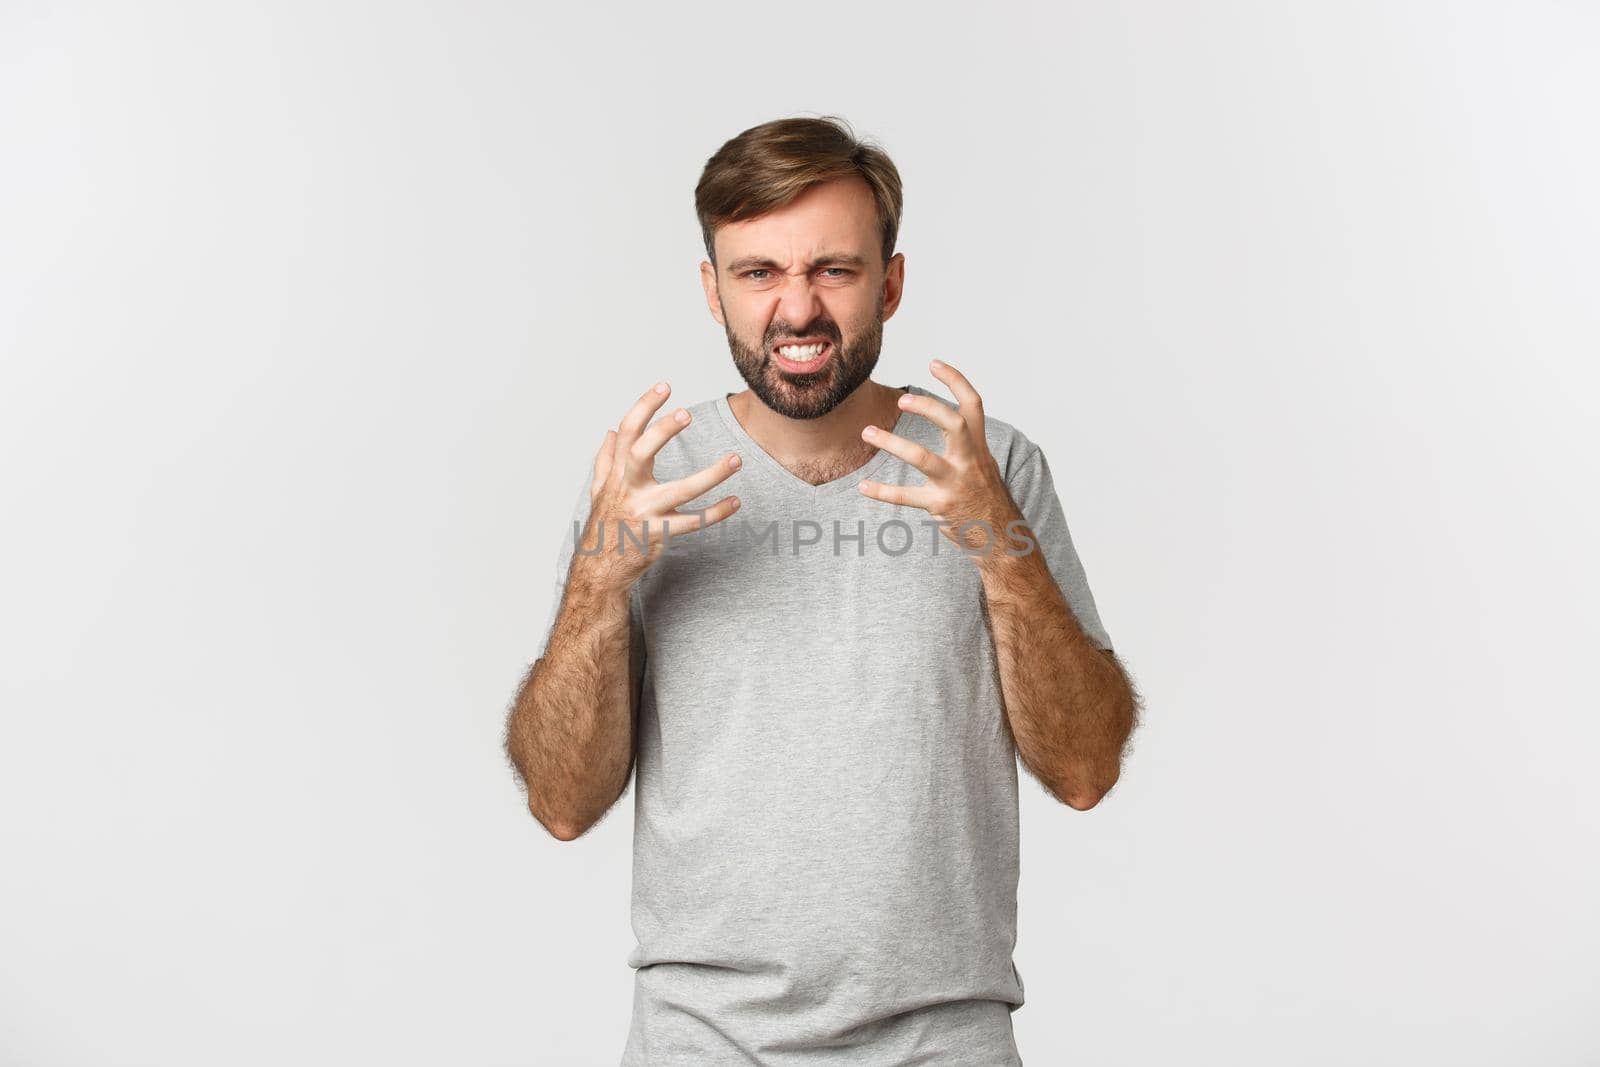 Portrait of angry bearded man, shouting and shaking hands frustrated, standing mad over white background.